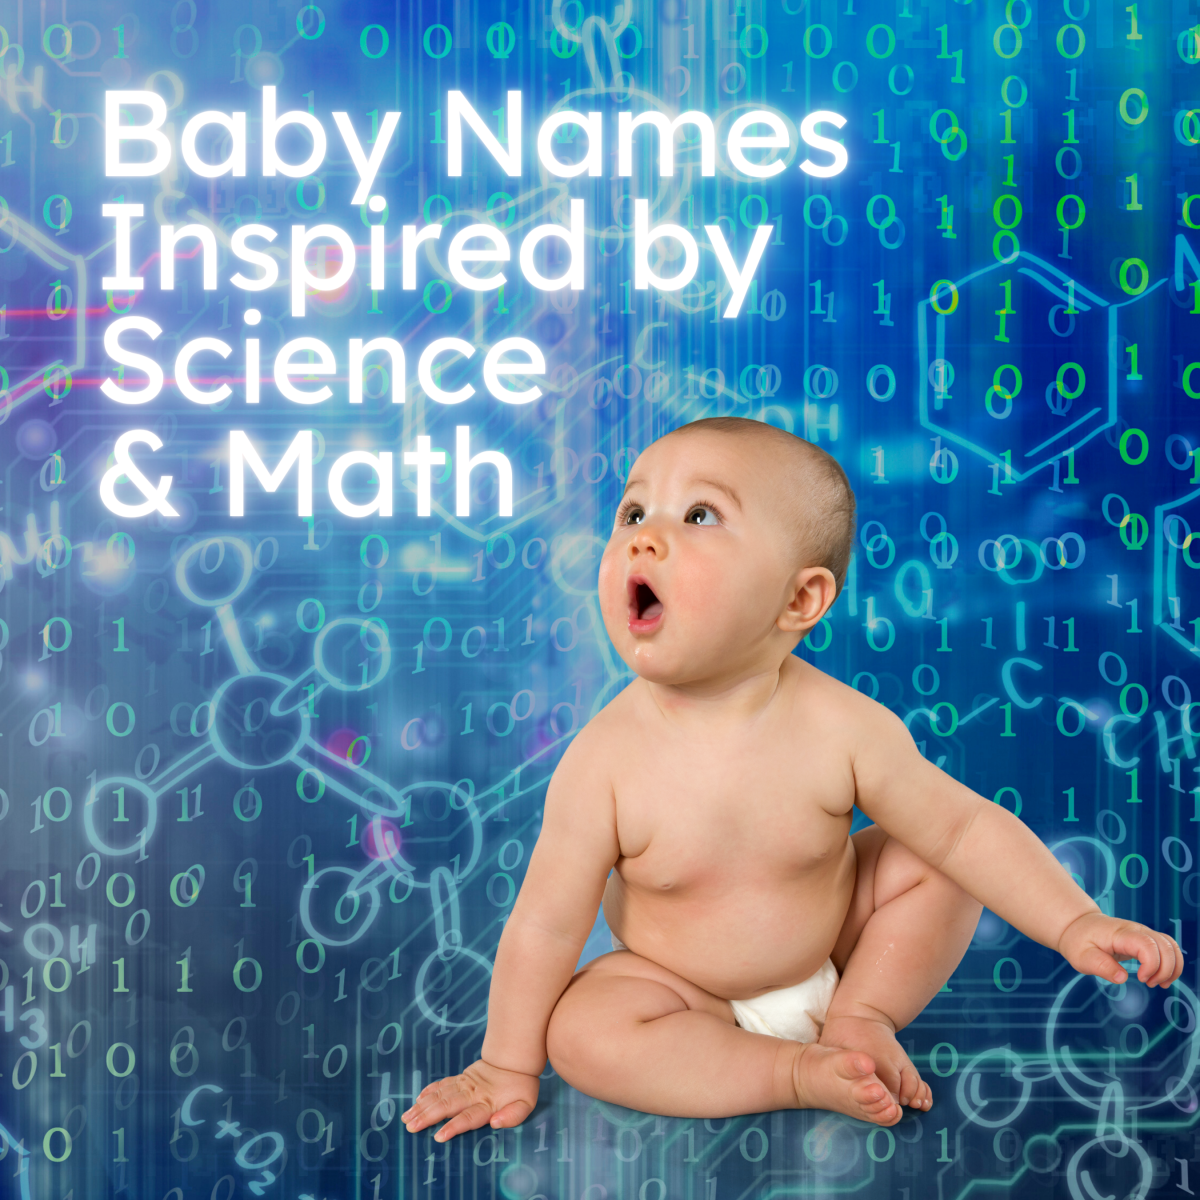 160+ Science-Inspired Baby Names From Physics, Math, Biology & Famous Scientists